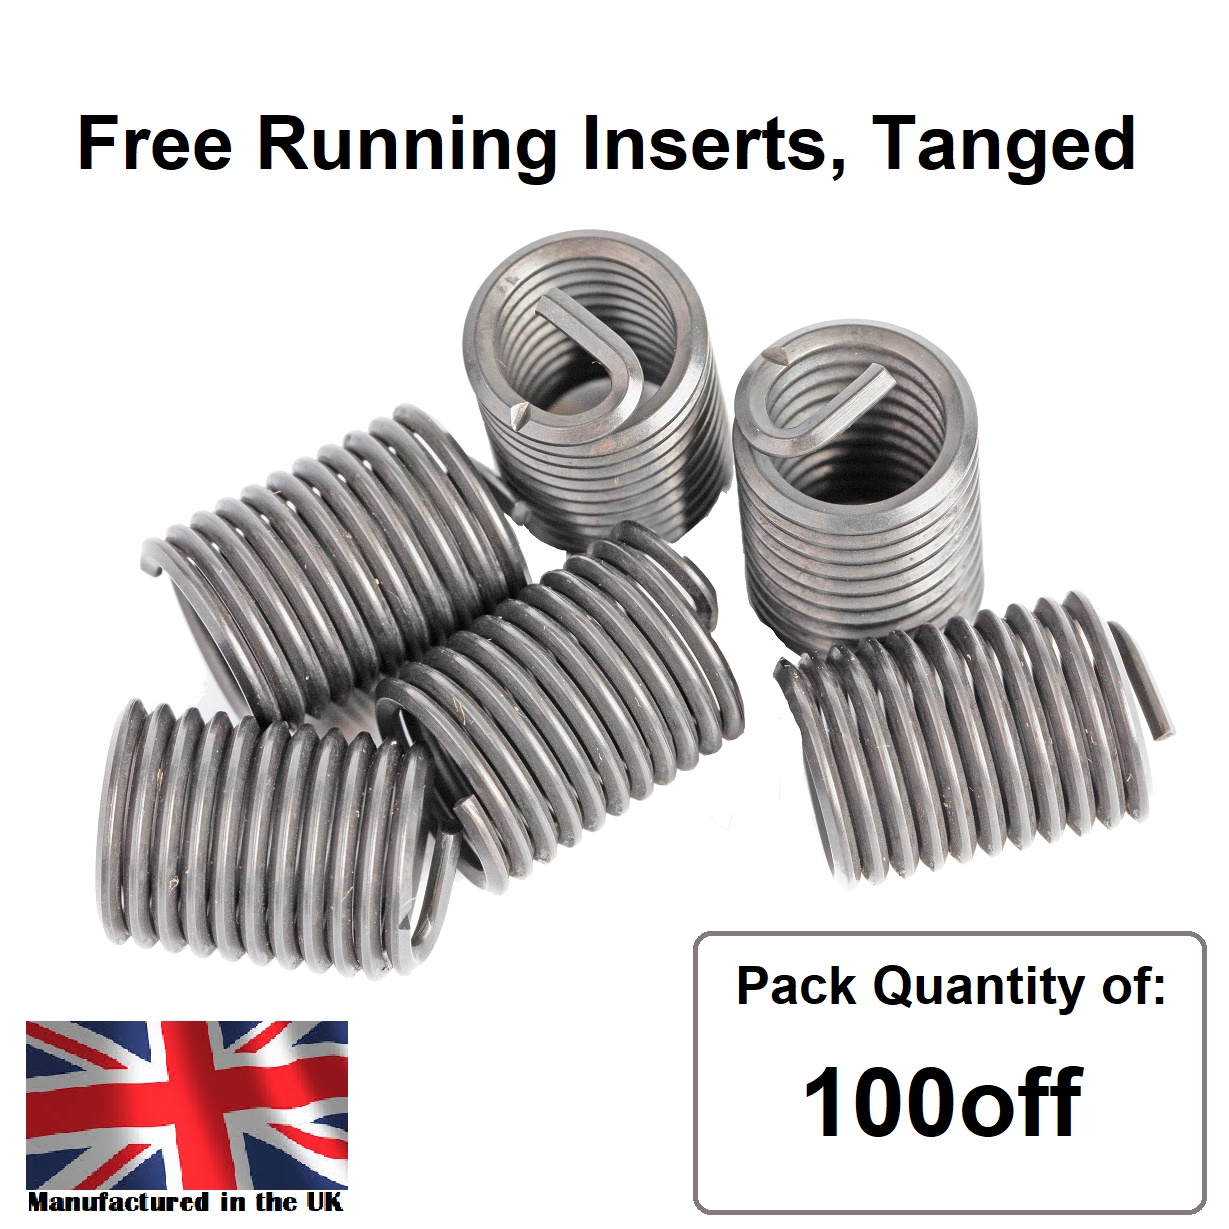 6-32 x 1D UNC, Free Running, Tanged, Wire Thread Repair Insert, 304/A2 Stainless (Pack 100)